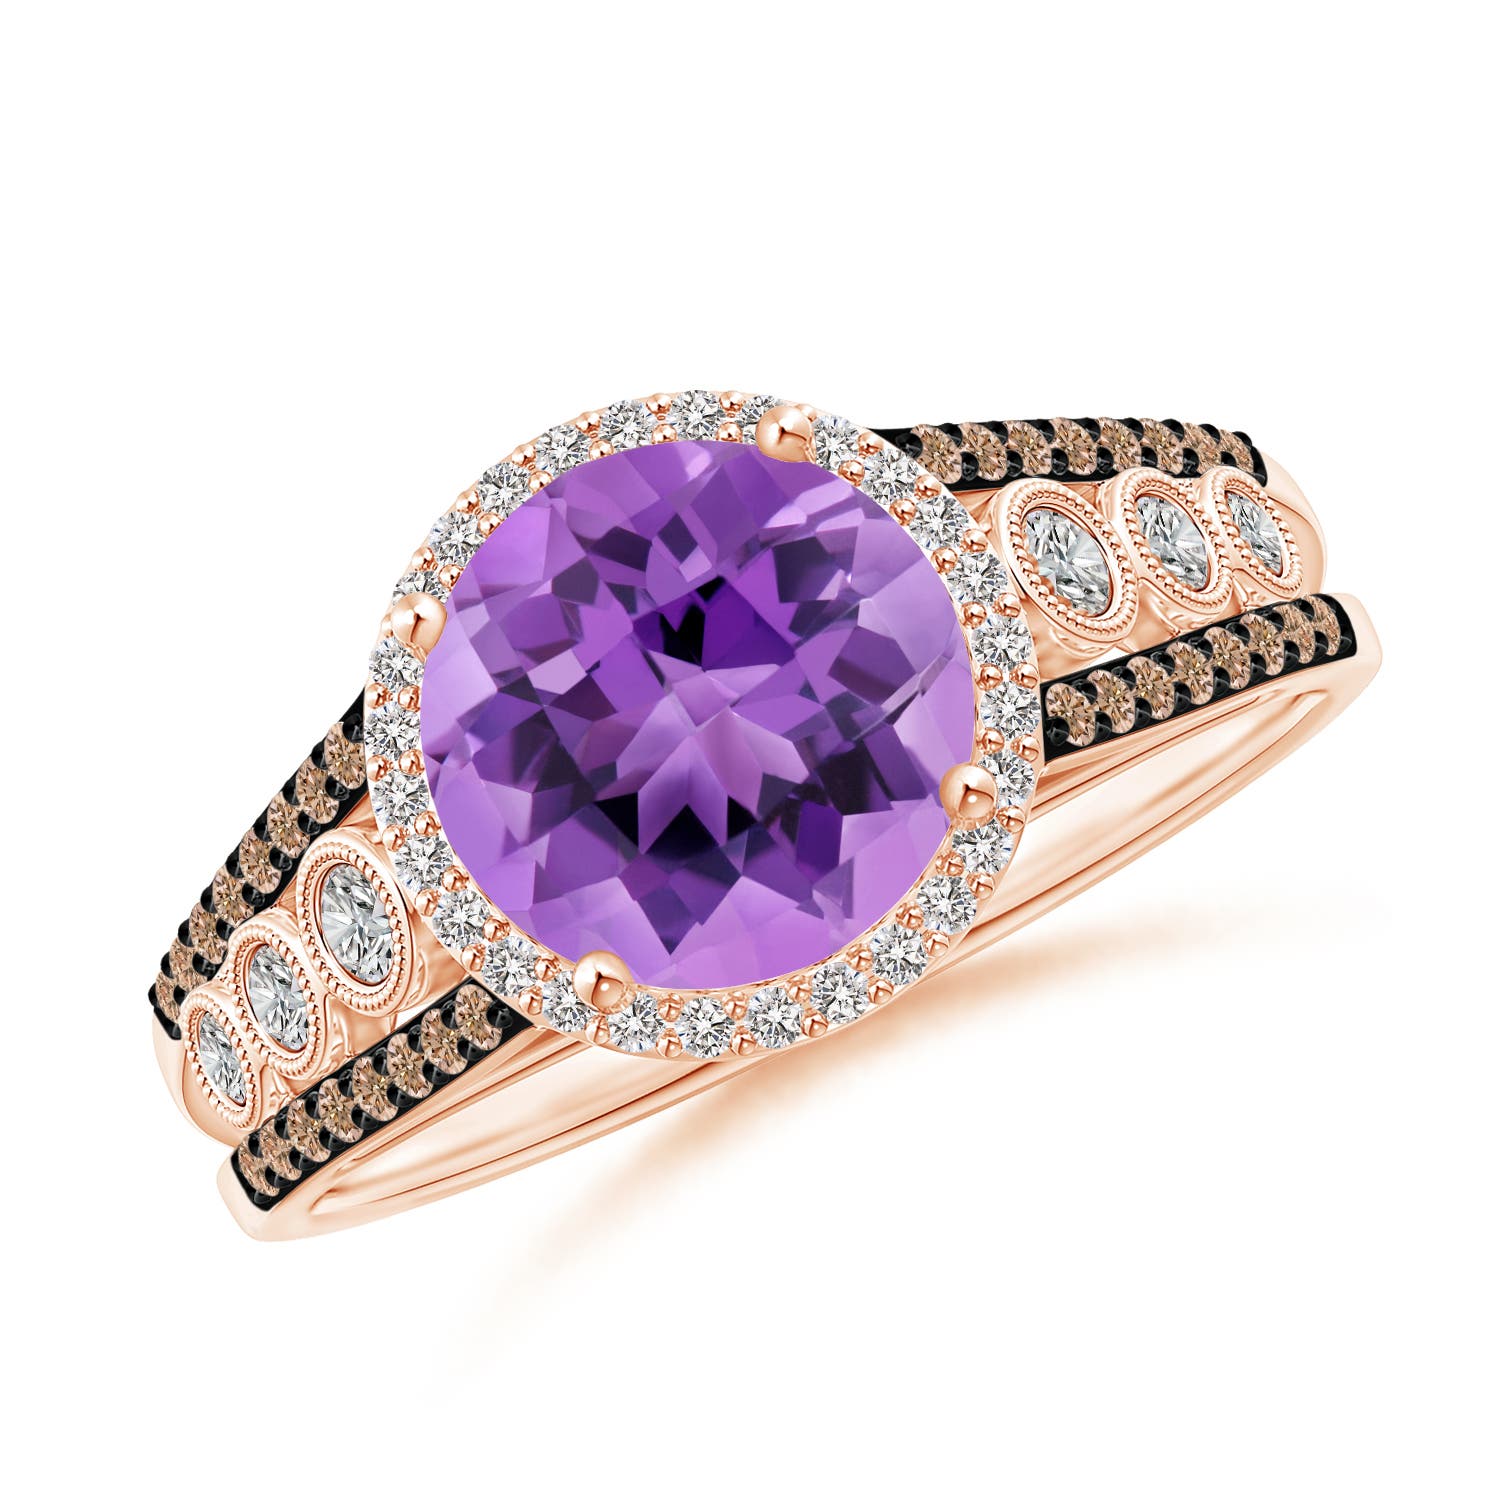 AA - Amethyst / 2.11 CT / 14 KT Rose Gold